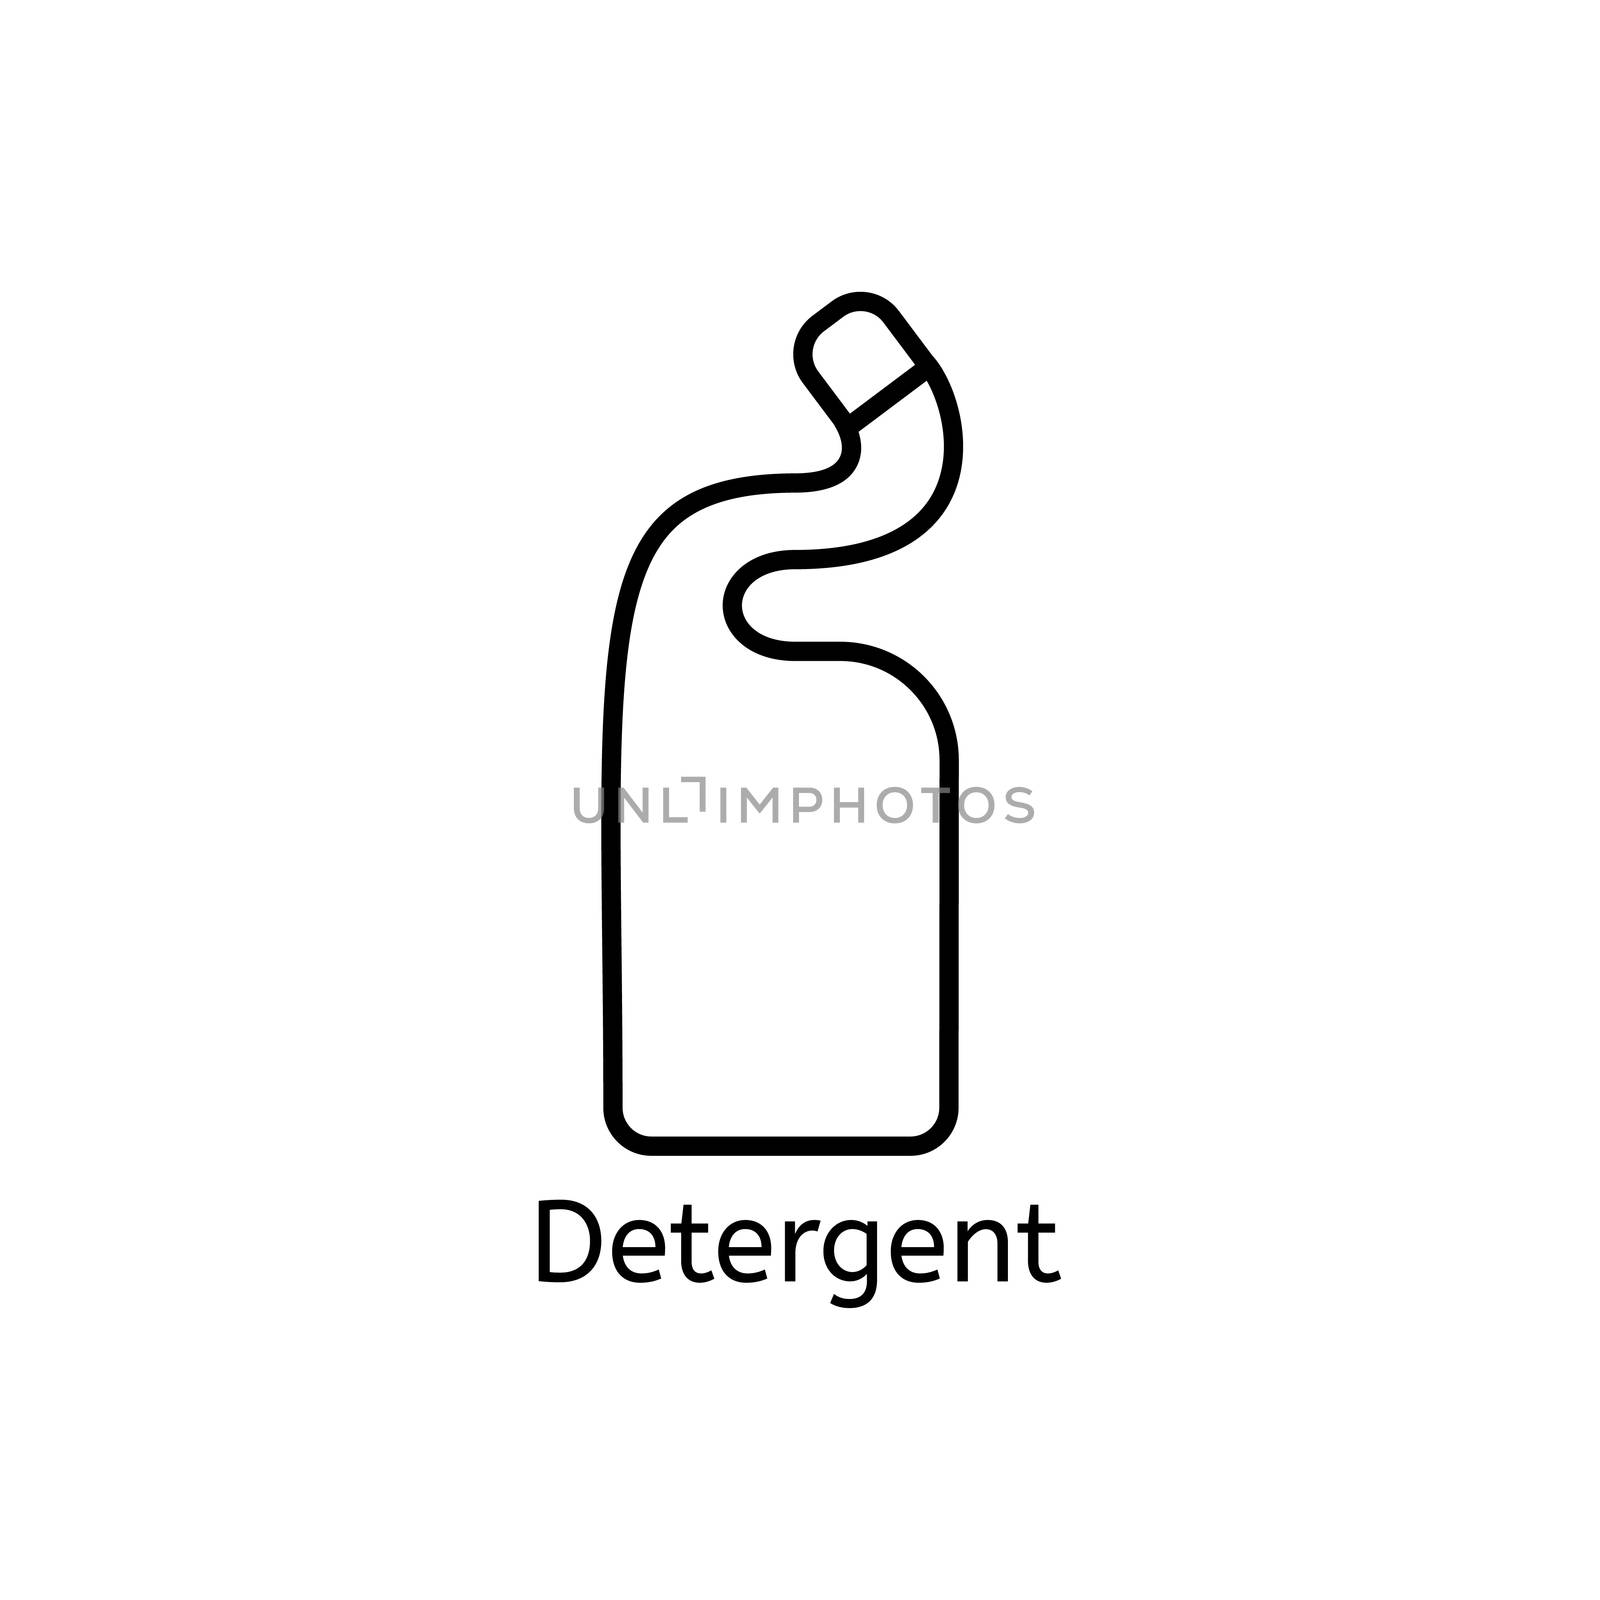 Detergents simple line icon. Liquid detergent thin linear signs. Means for cleaning simple concept for websites, infographic, mobile app.